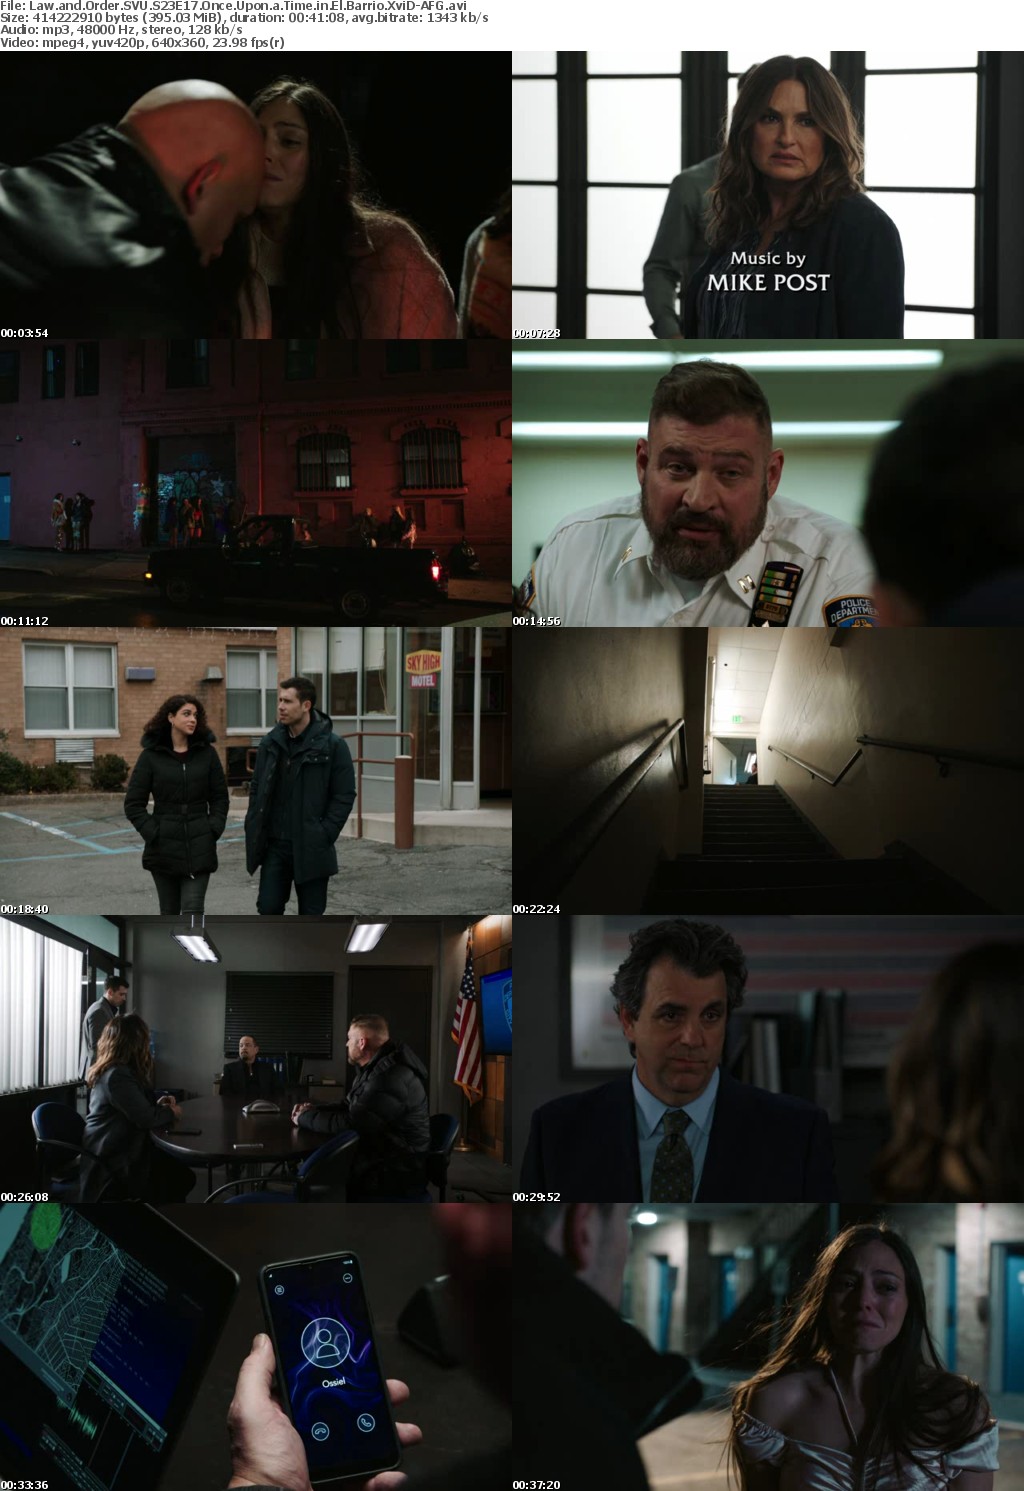 Law and Order SVU S23E17 Once Upon a Time in El Barrio XviD-AFG